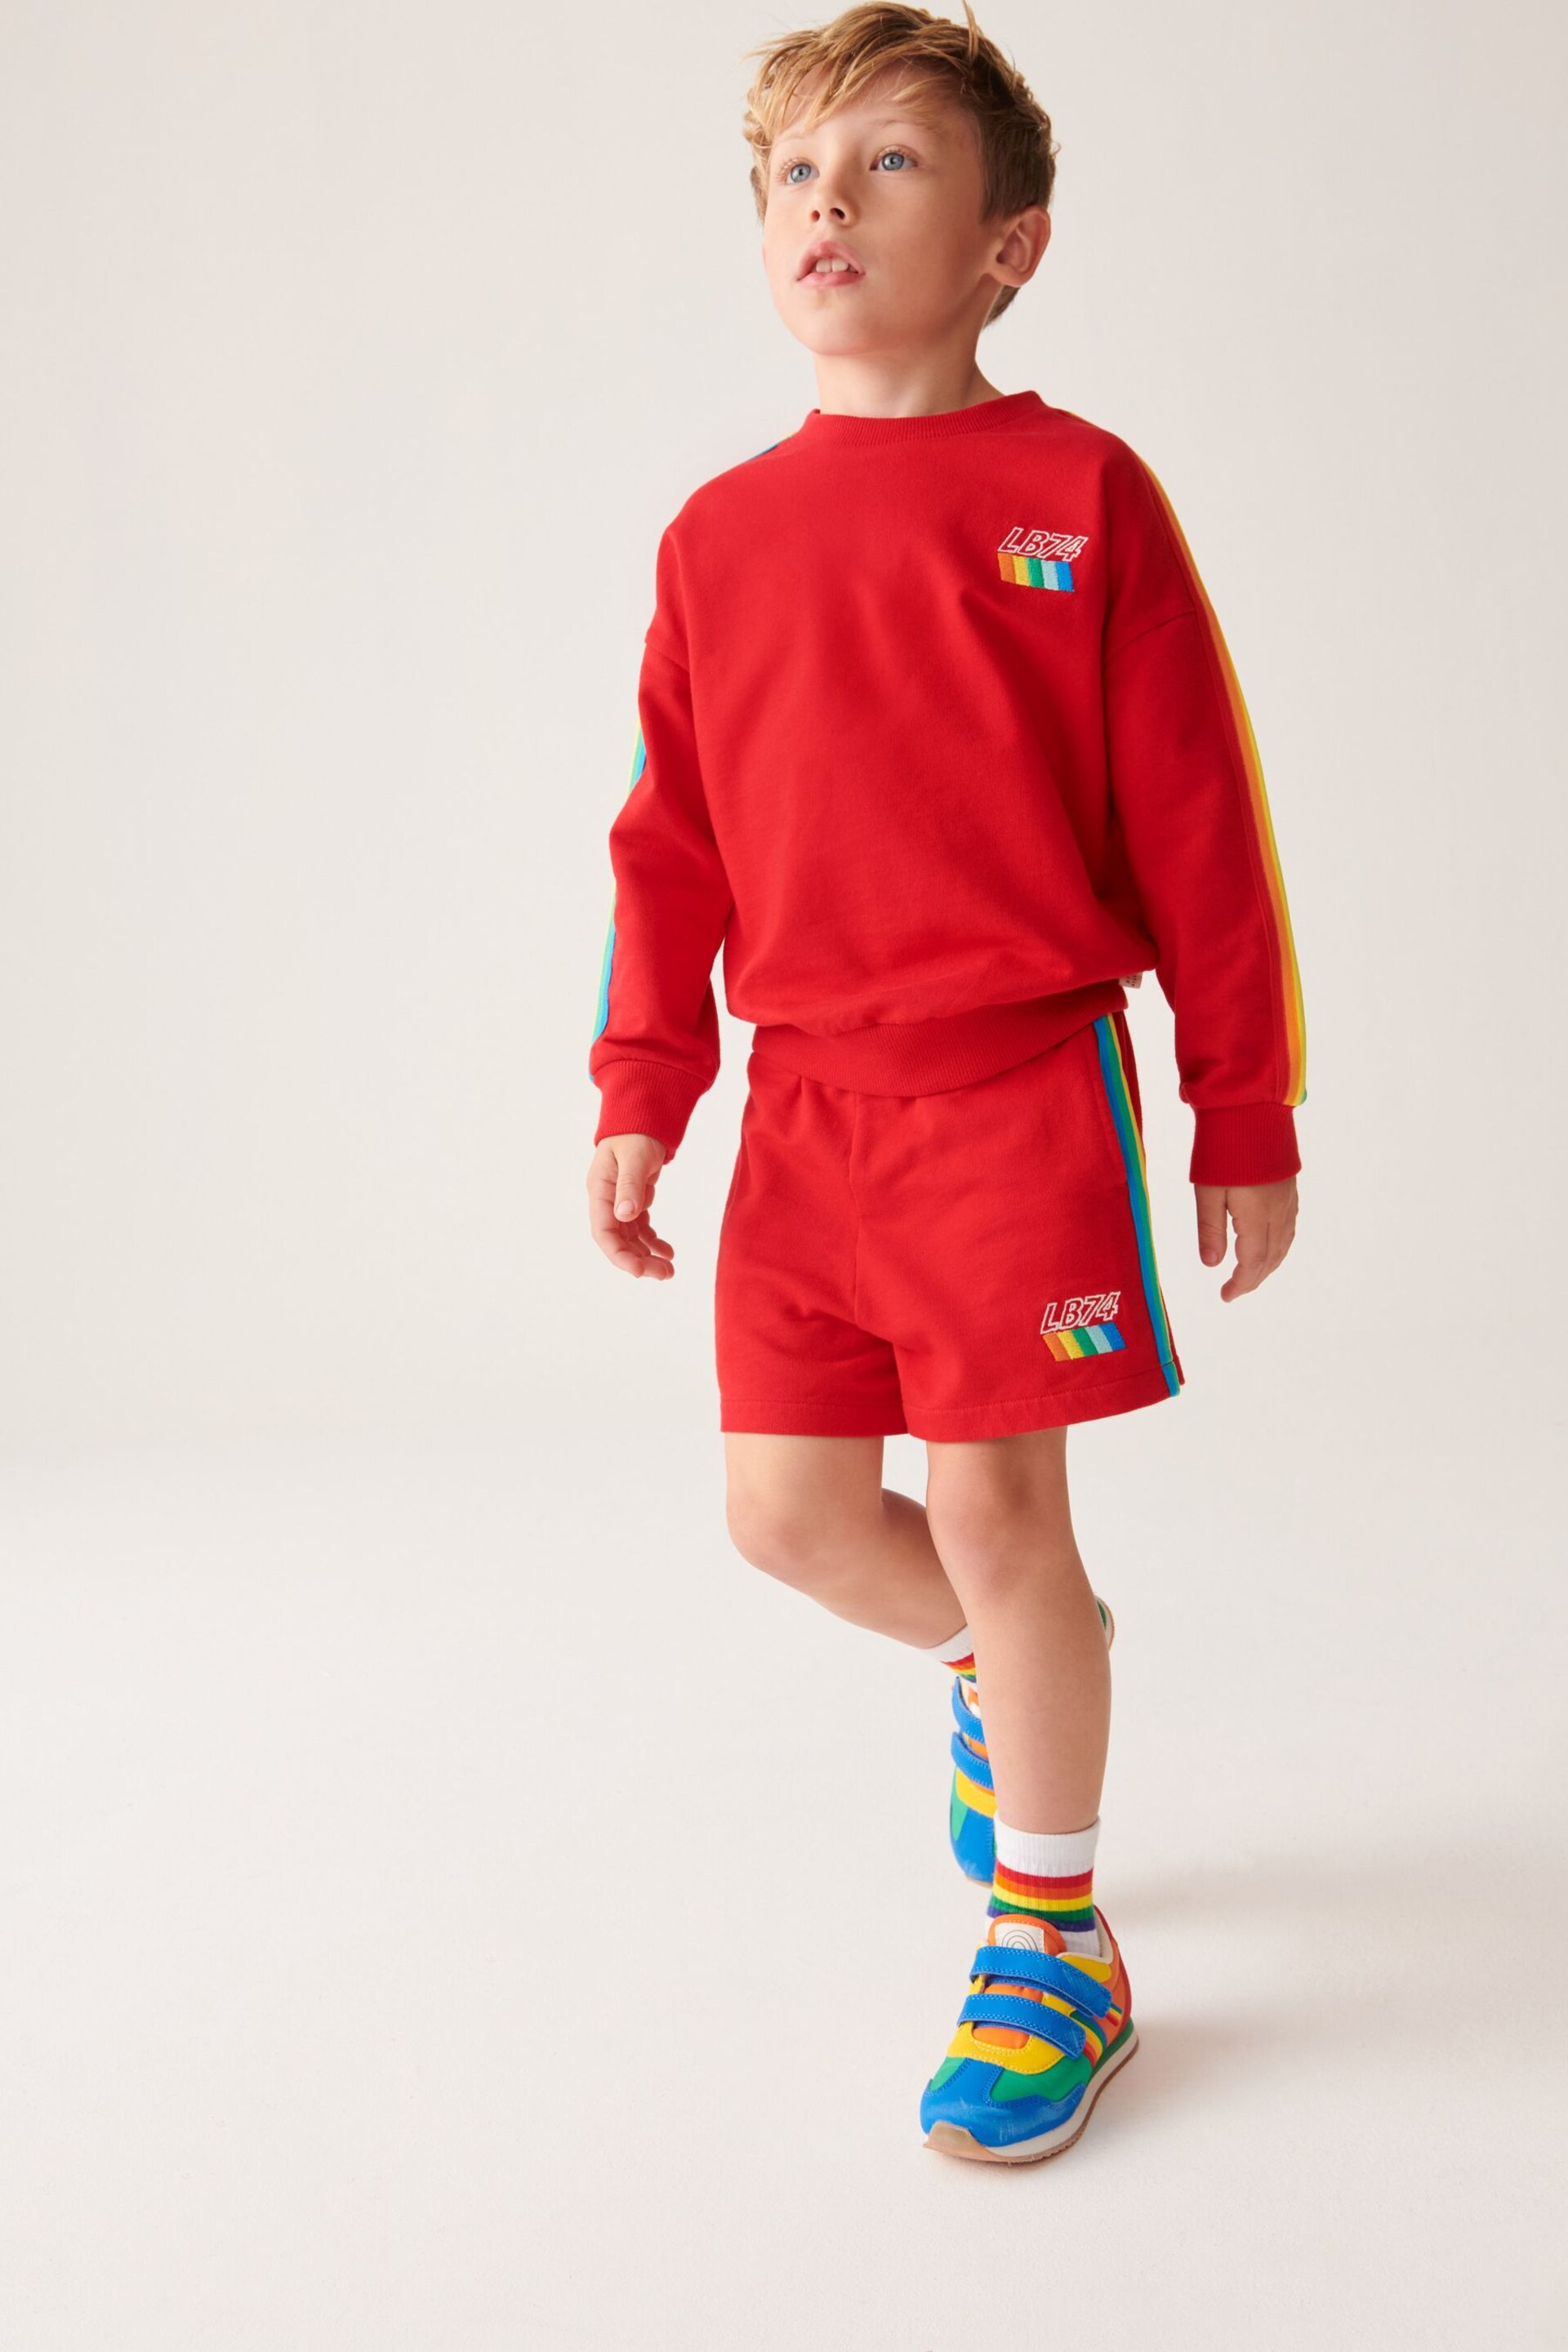 Little Bird by Jools Oliver Red Rainbow Sweat Top and Short Set - Image 2 of 14